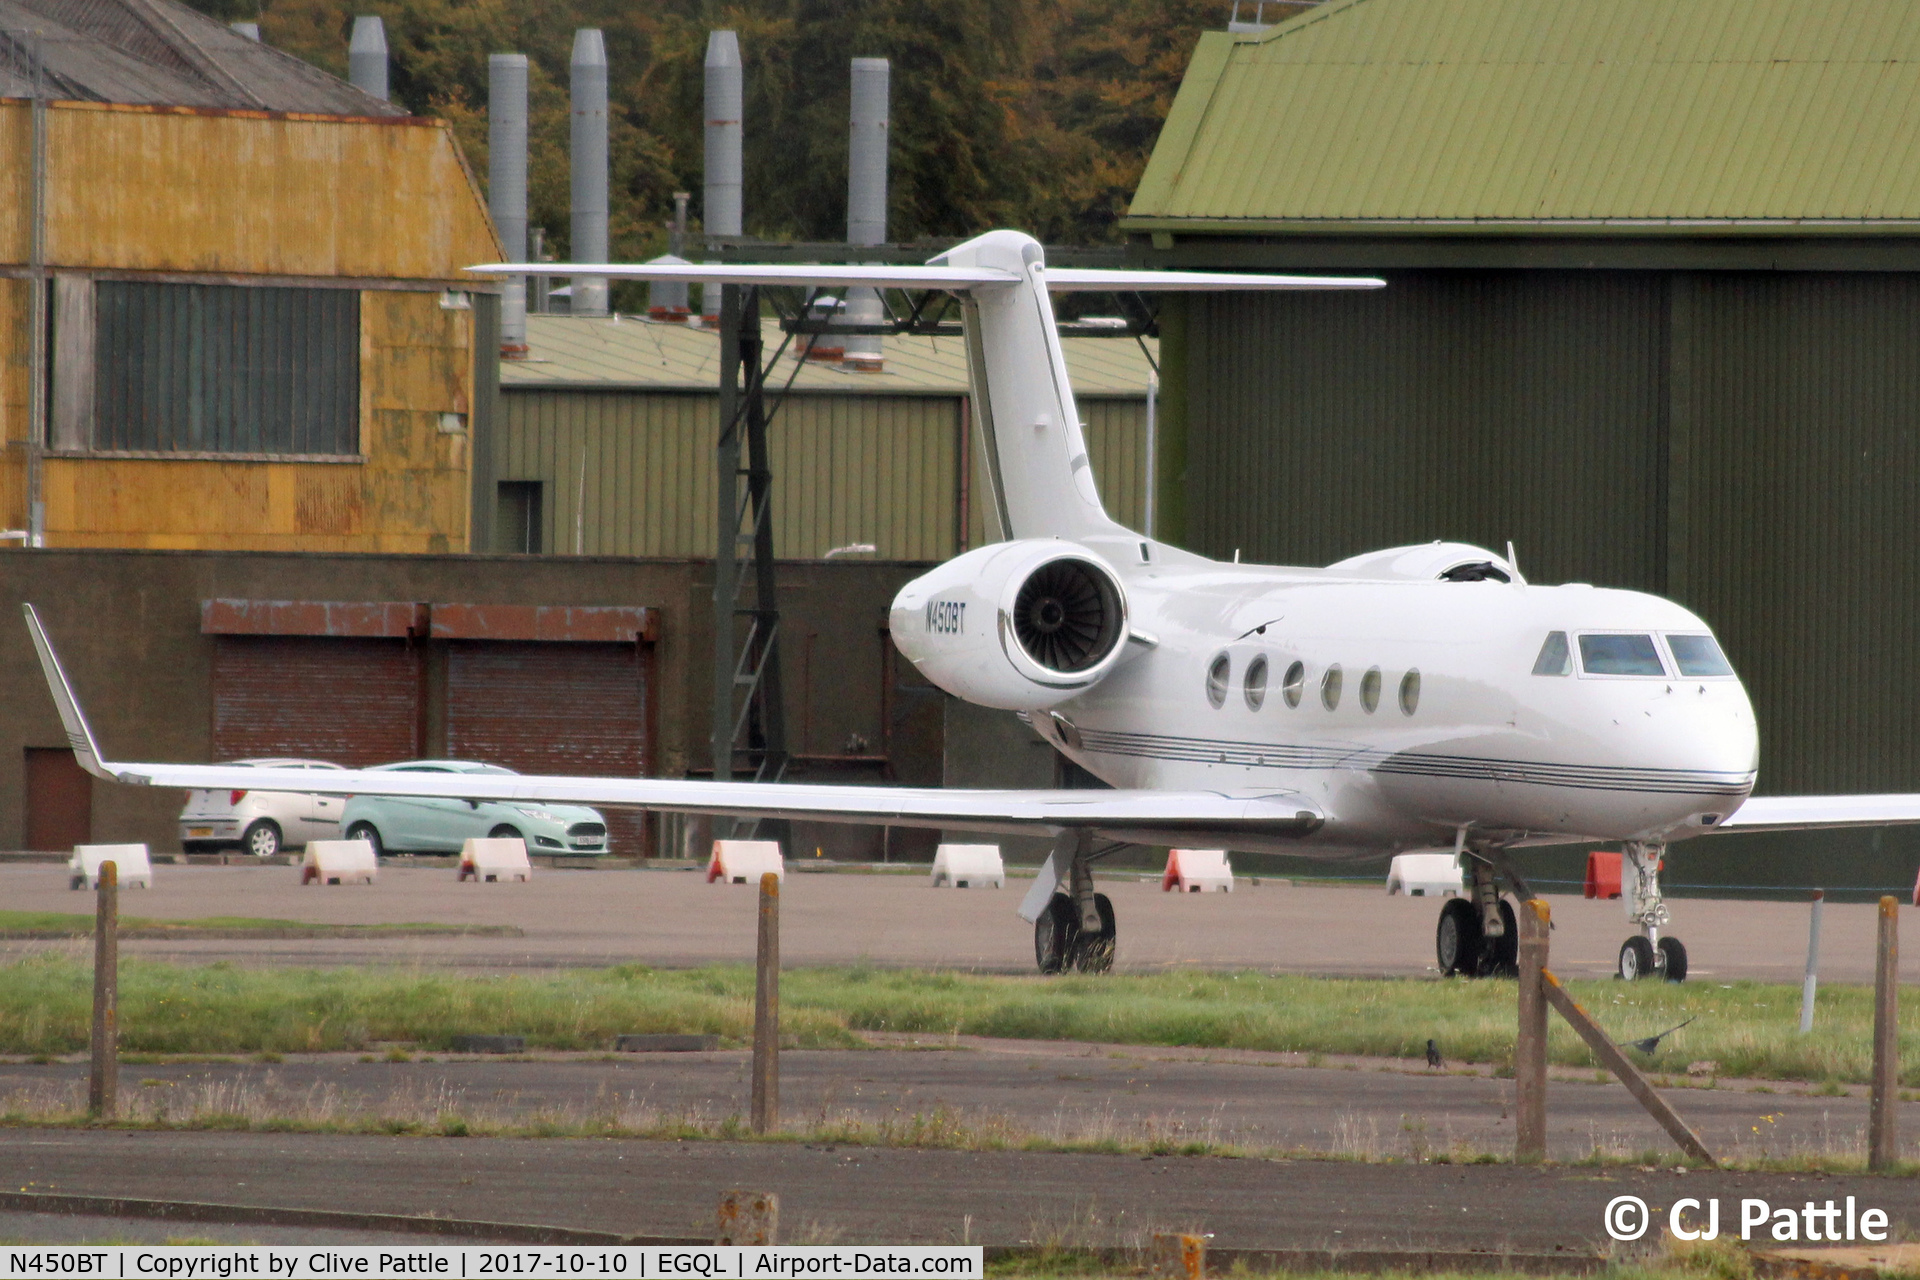 N450BT, 2016 Gulfstream Aerospace GIV-X (G450) C/N 4065, Pictured on the ramp at the former RAF Leuchars, for the nearby Dunhill Links Golf Championships at St Andrews.